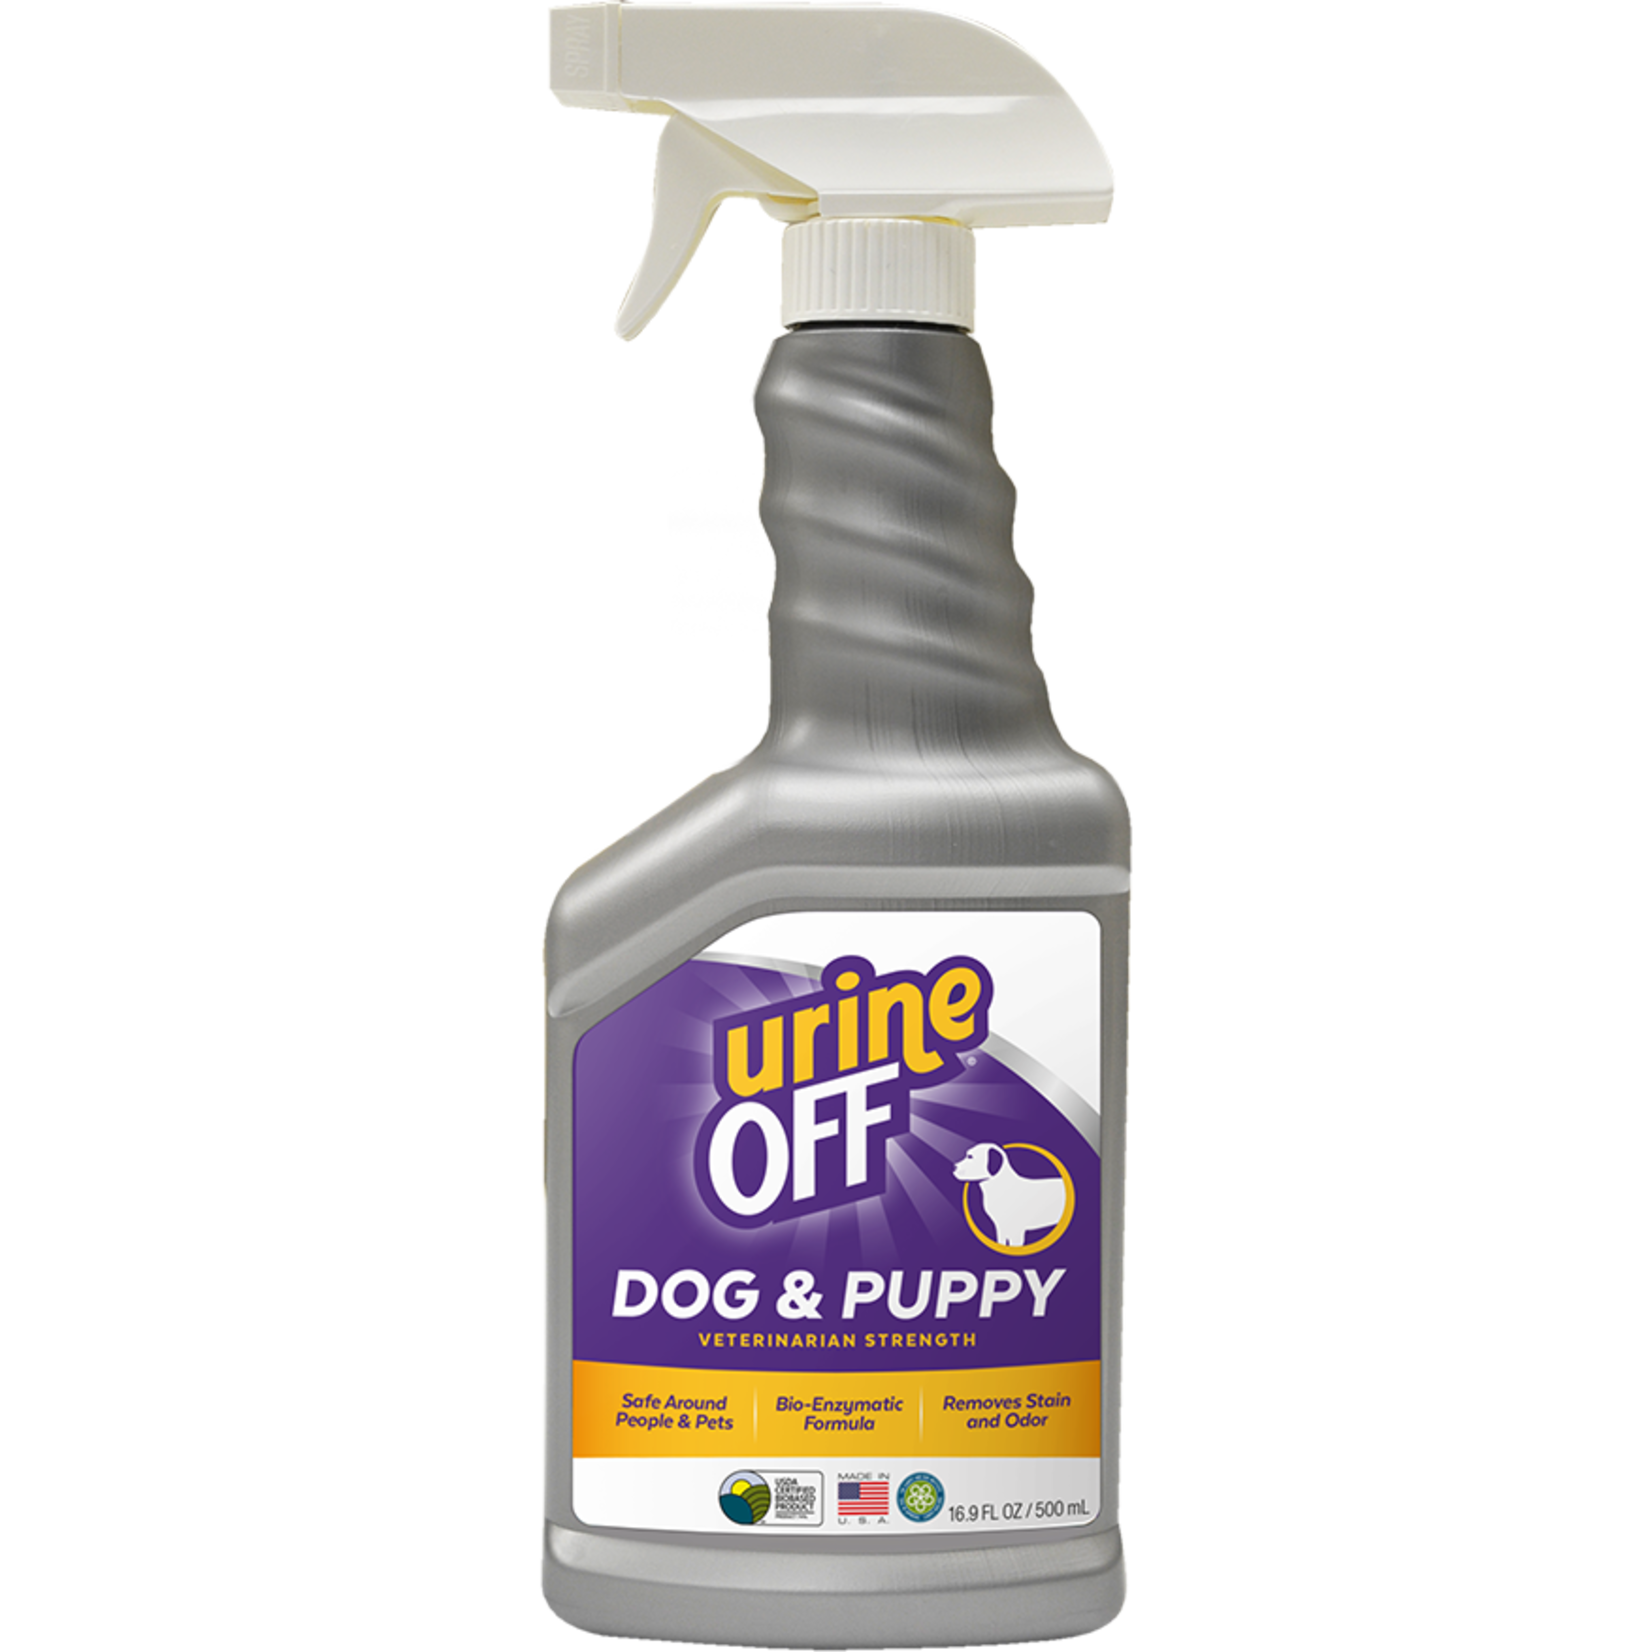 Urine Off Urine Off Dog Puppy Stain and Odor Remover 16.9oz